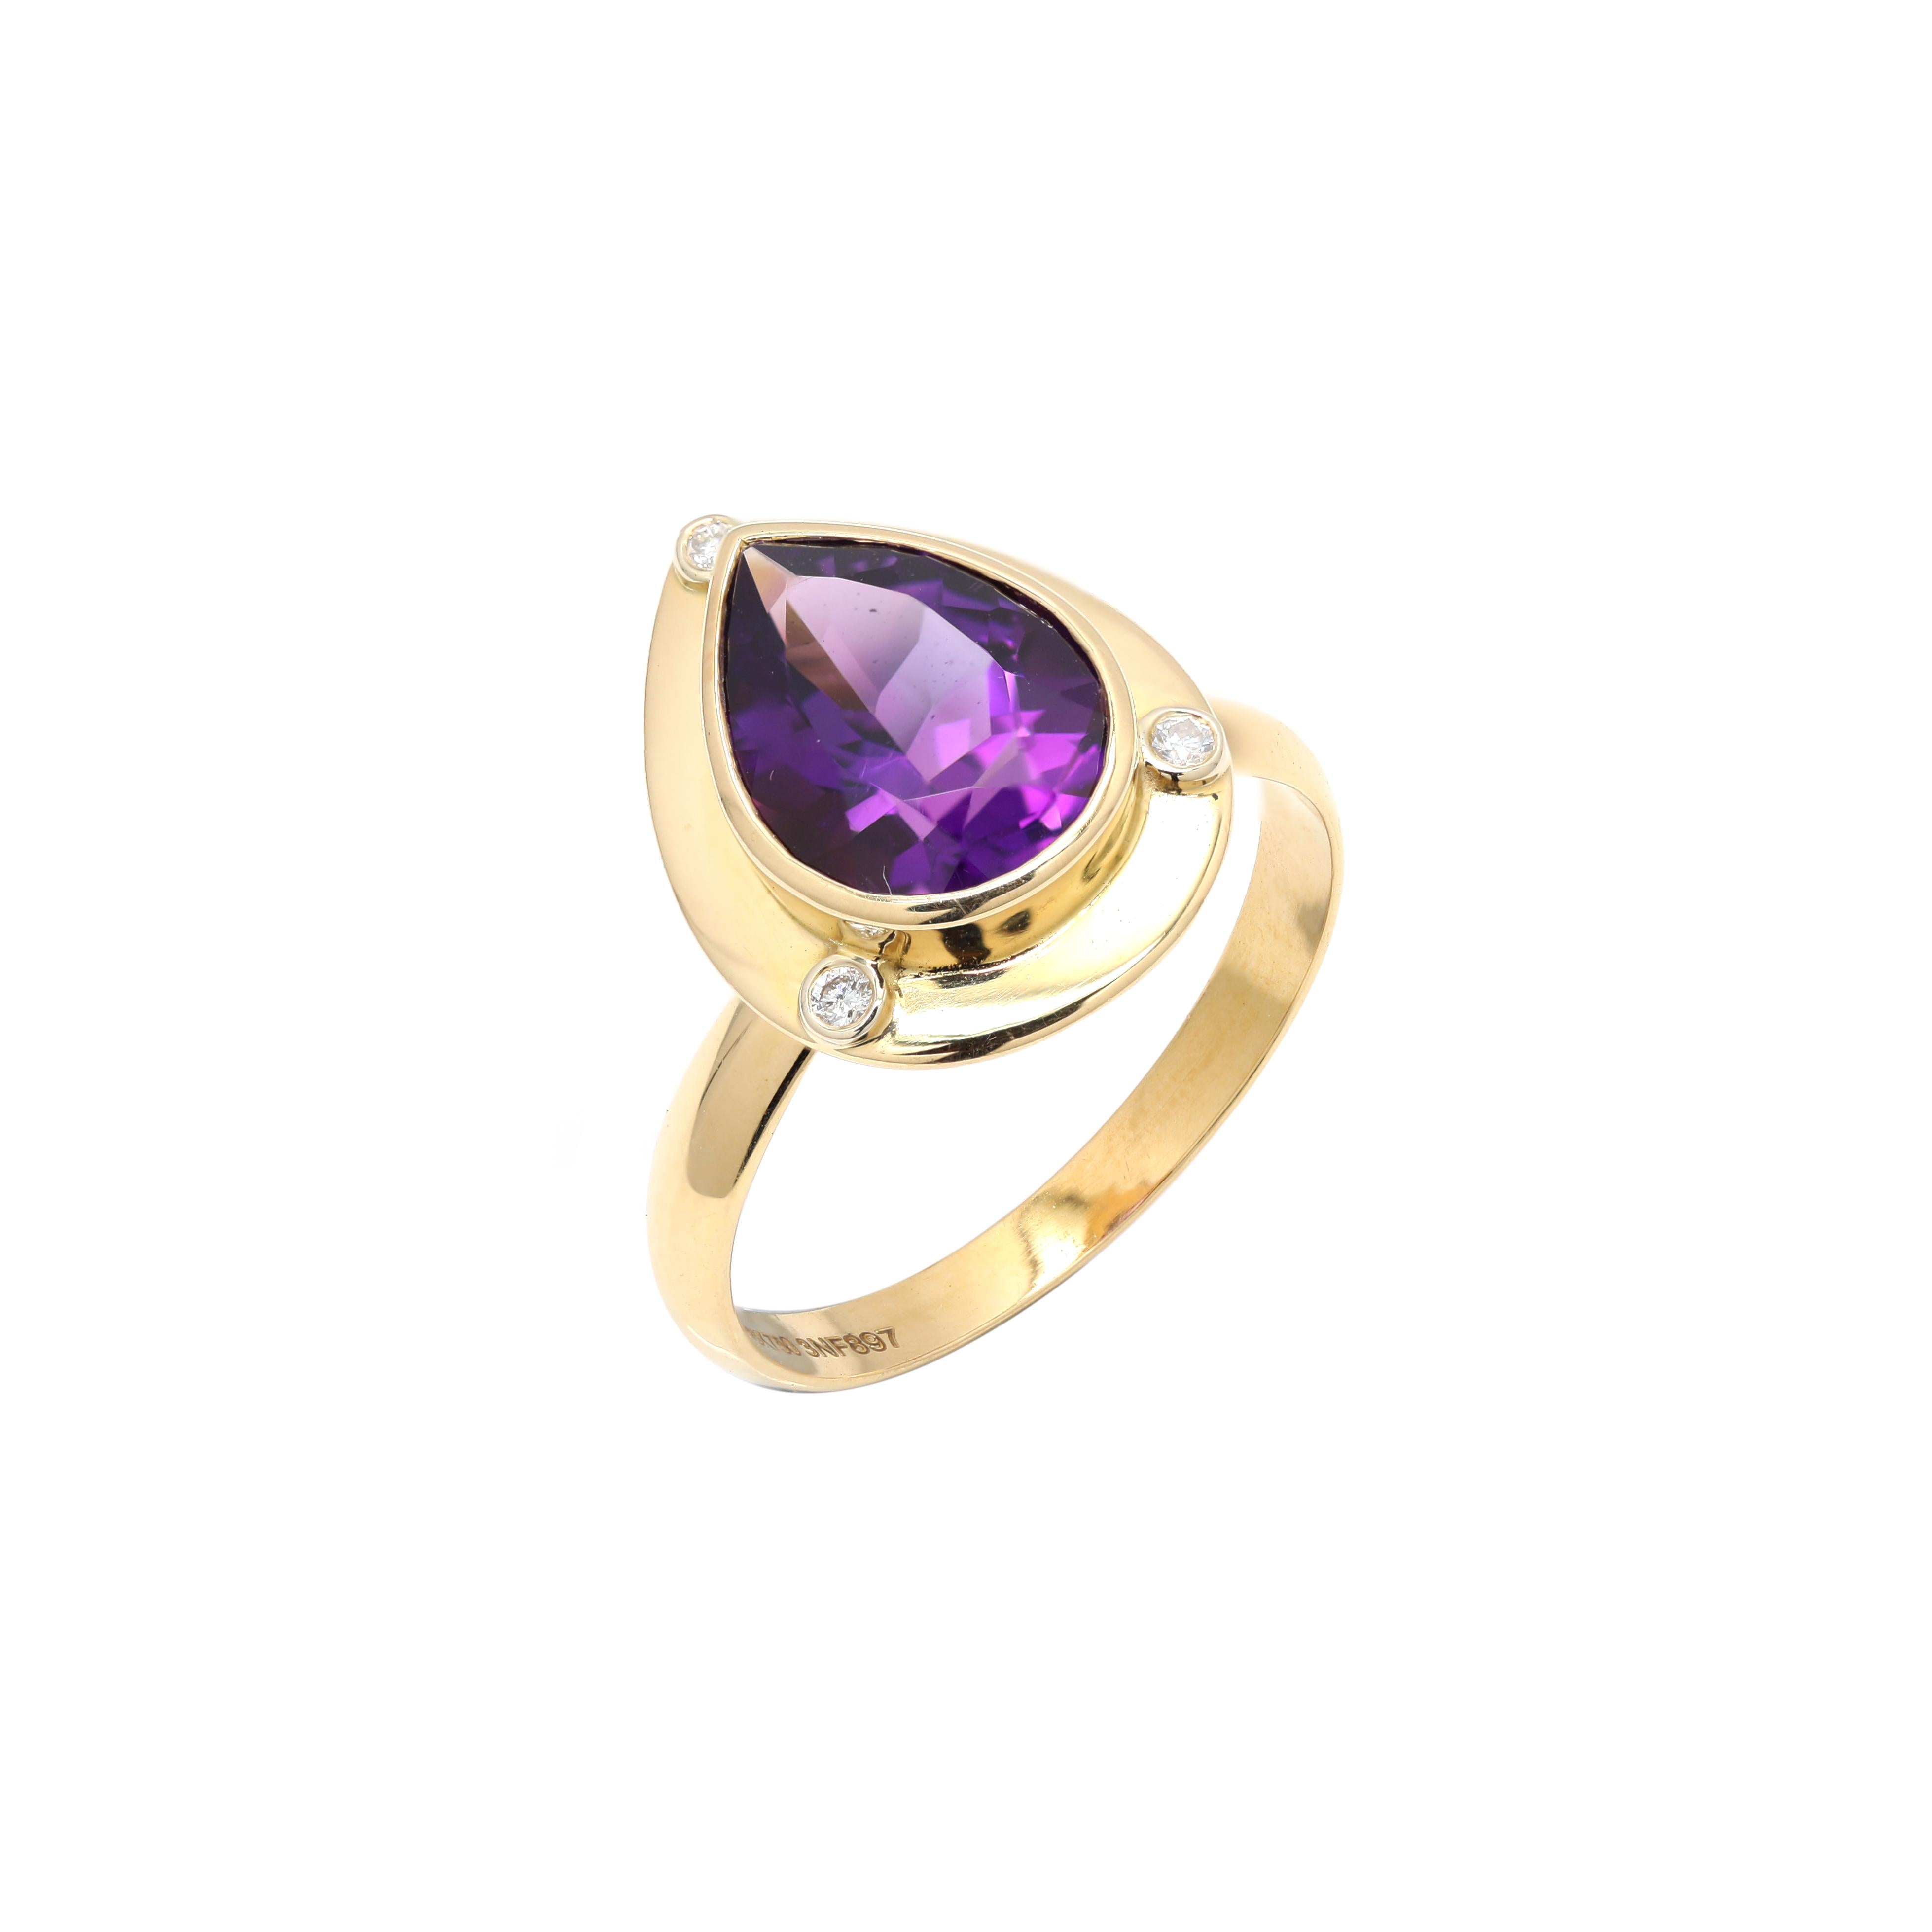 For Sale:  Estelar 2.45ct Amethyst Ring with Diamonds Mounted with 18k Yellow Gold 4